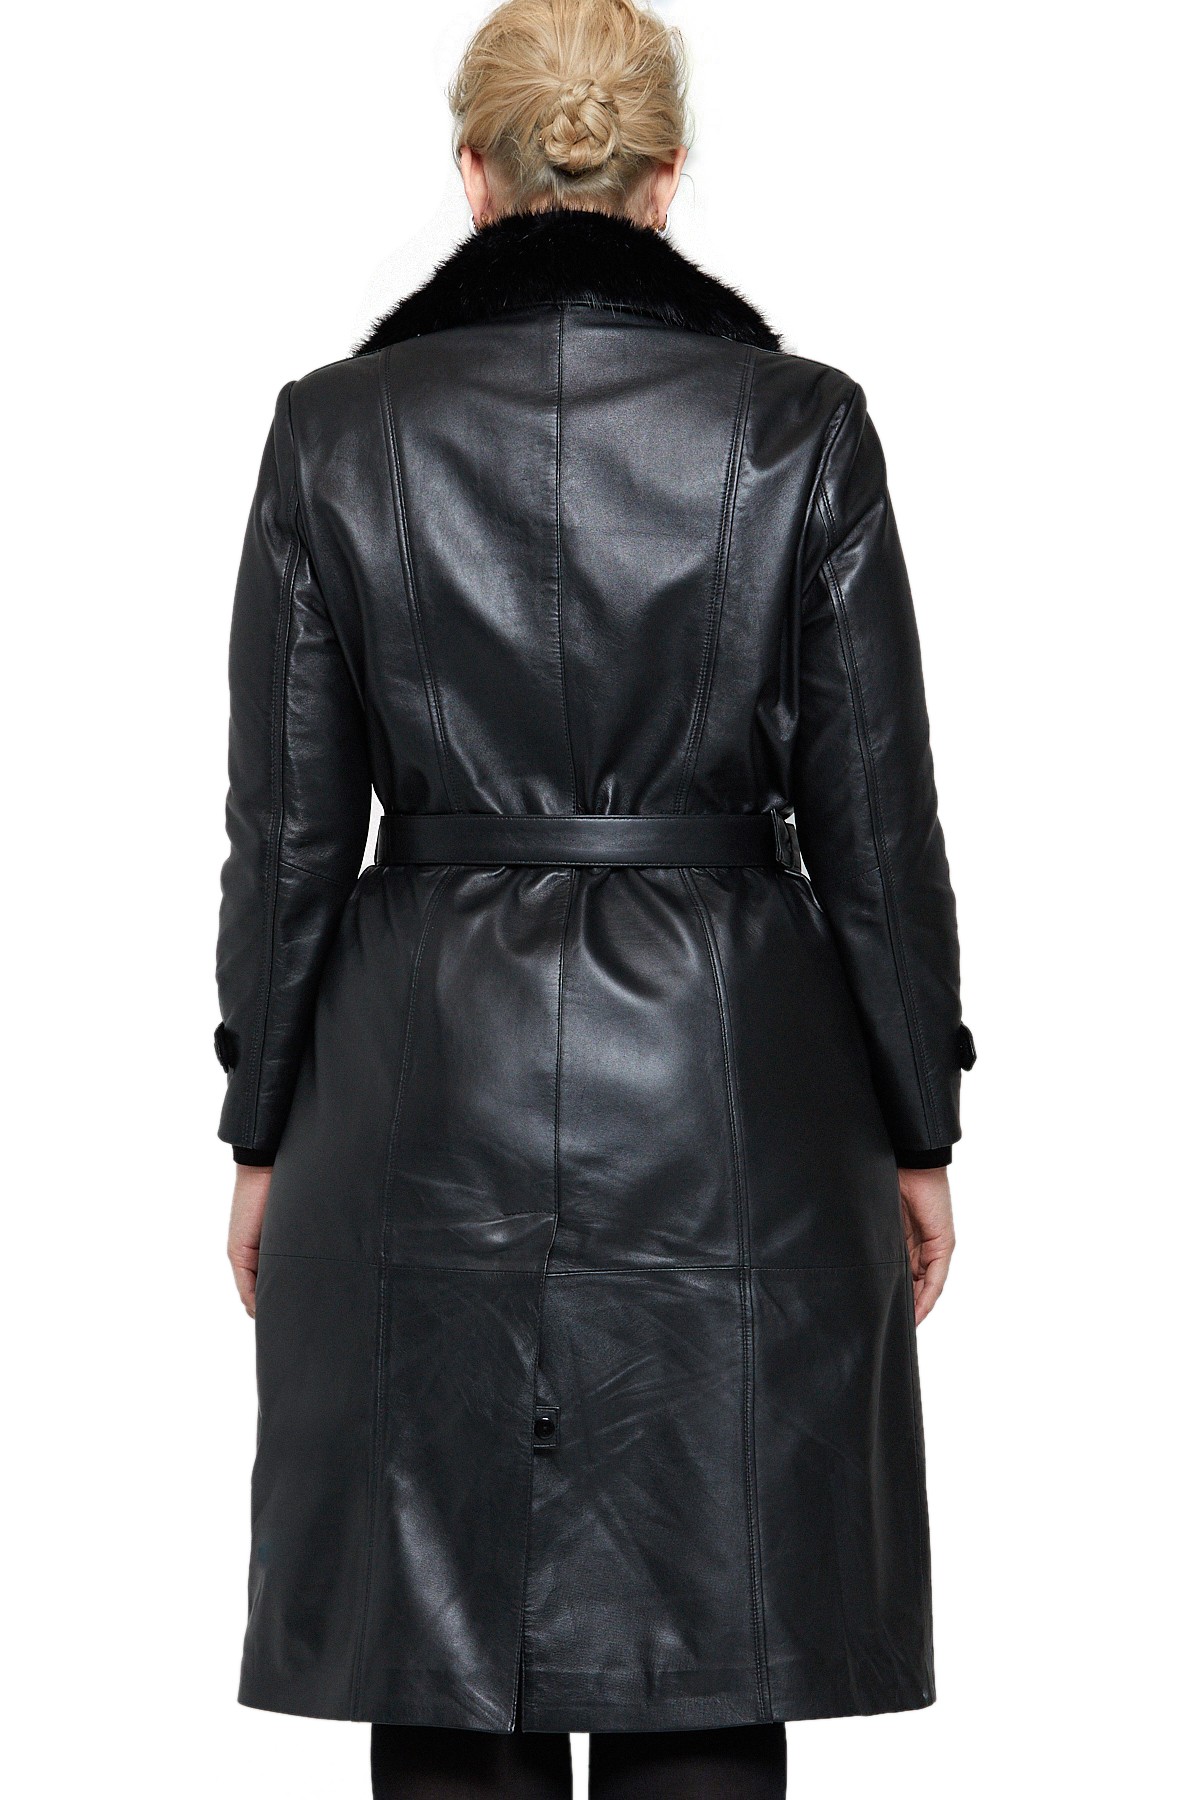 fur collar womens long leather trench coat 2